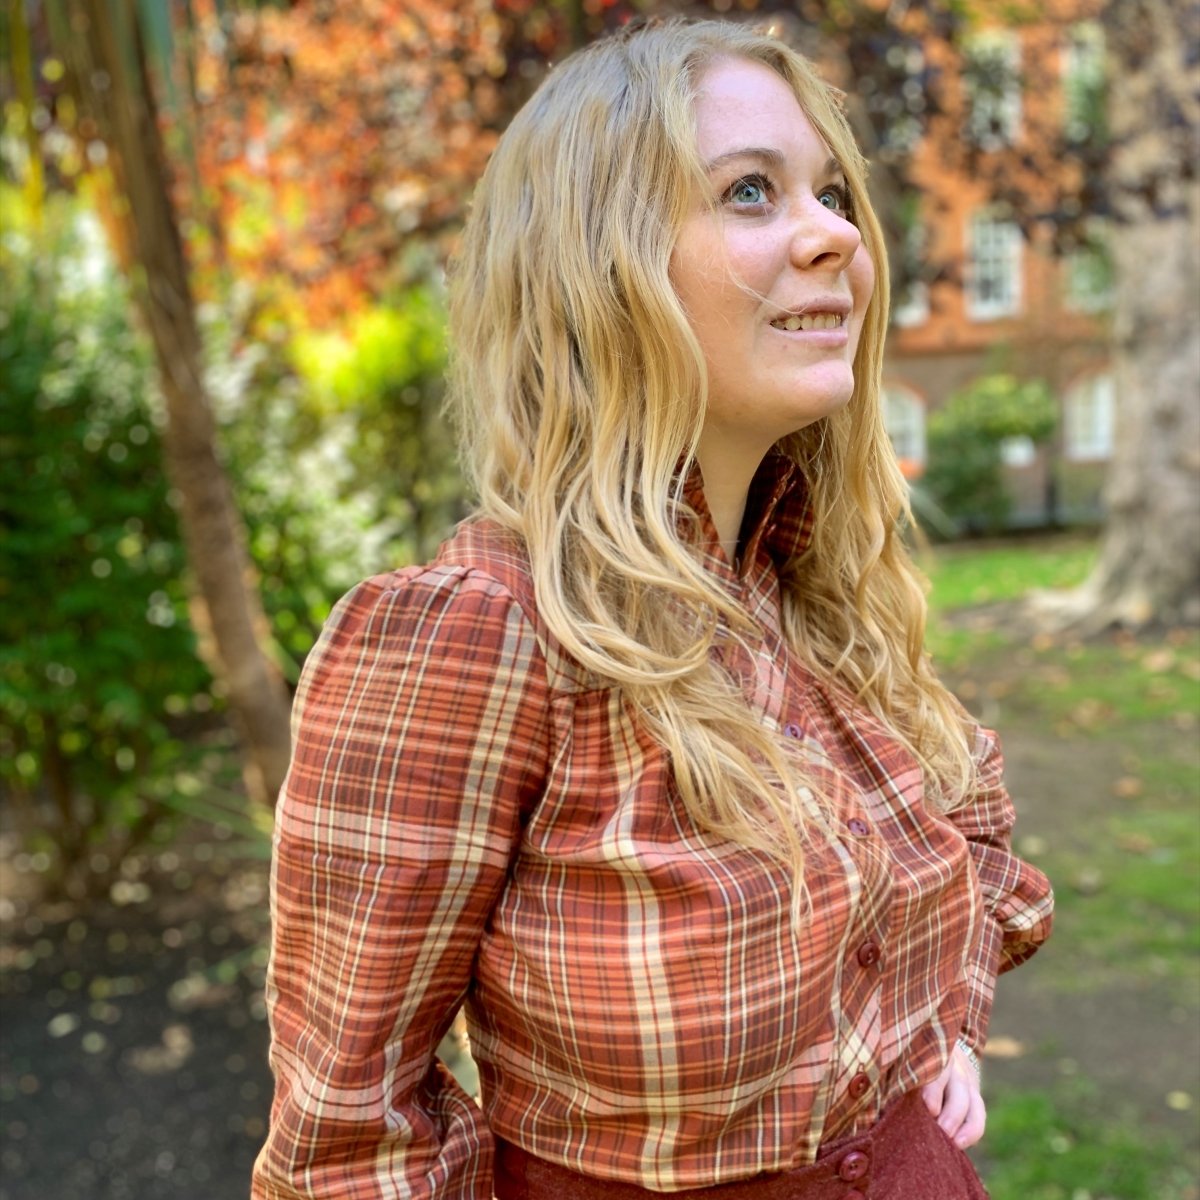 Vintage inspired blouse with long sleeves and round collar- The Bishopess Blouse by Emmy Design Sweden in rust plaid as worn by Carlisle who has long blonde hair and blue eyes